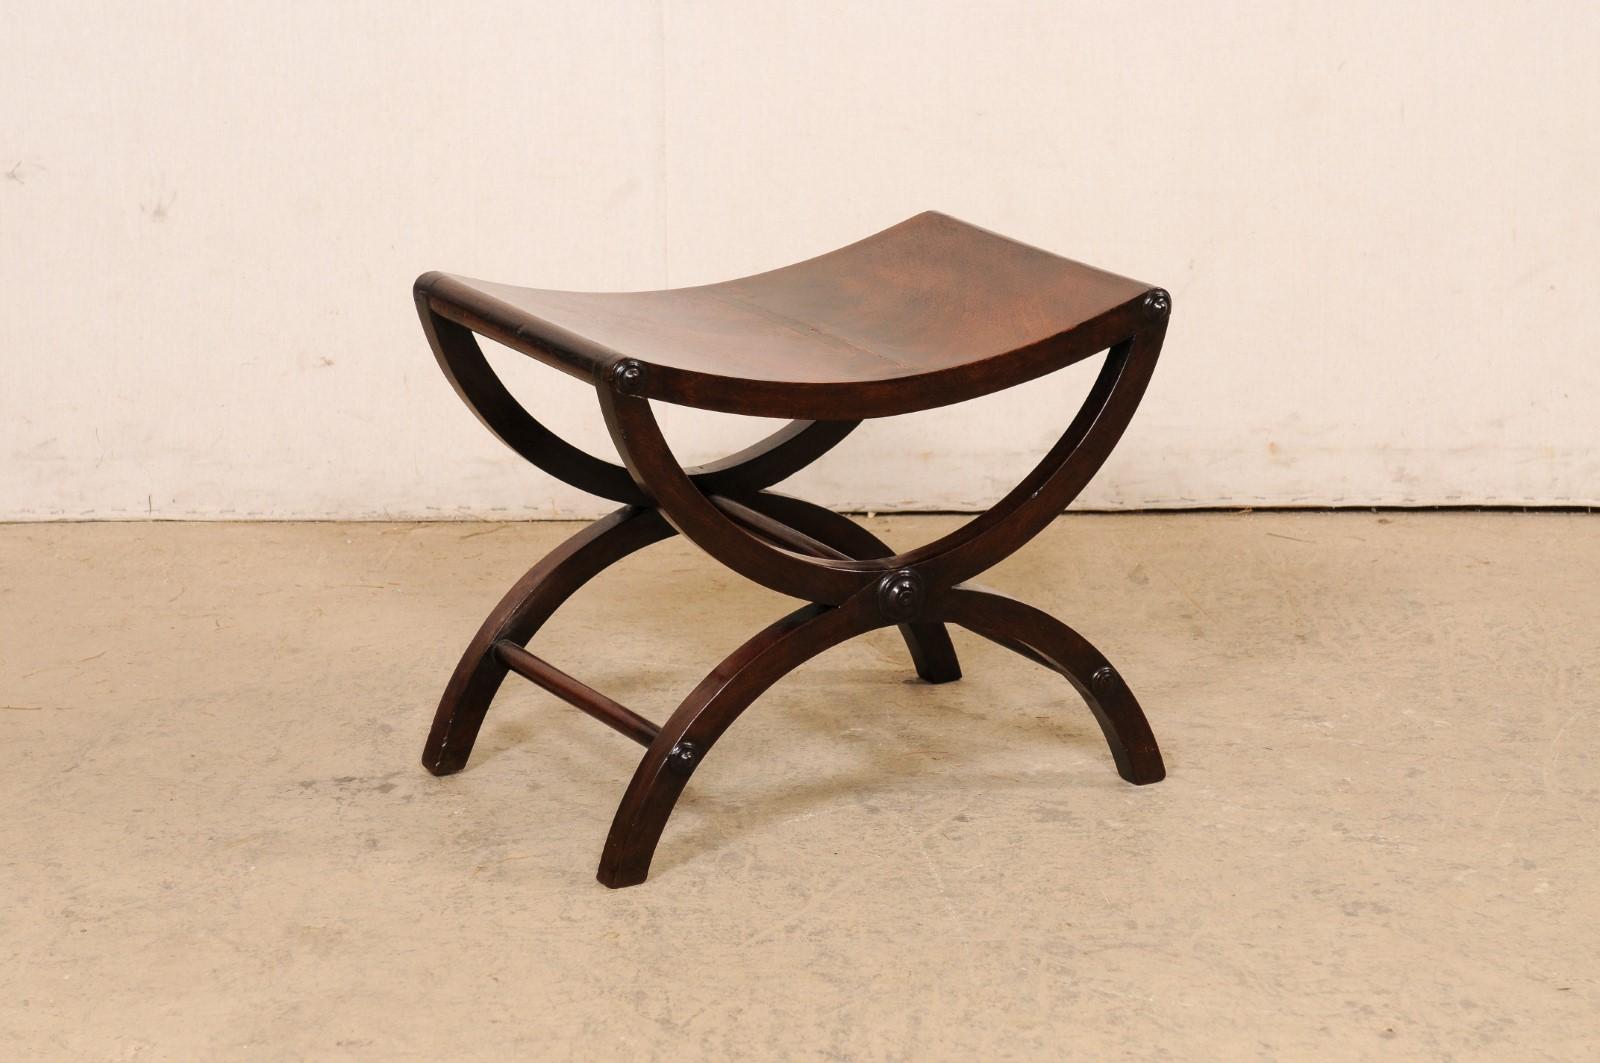 An English carved-mahogany wood curule-style stool from the 19th century. This antique stool from England has been created in the Curule (or often referred to as Dante) style, featuring a swag-carved seat which is raised upon a pair of legs